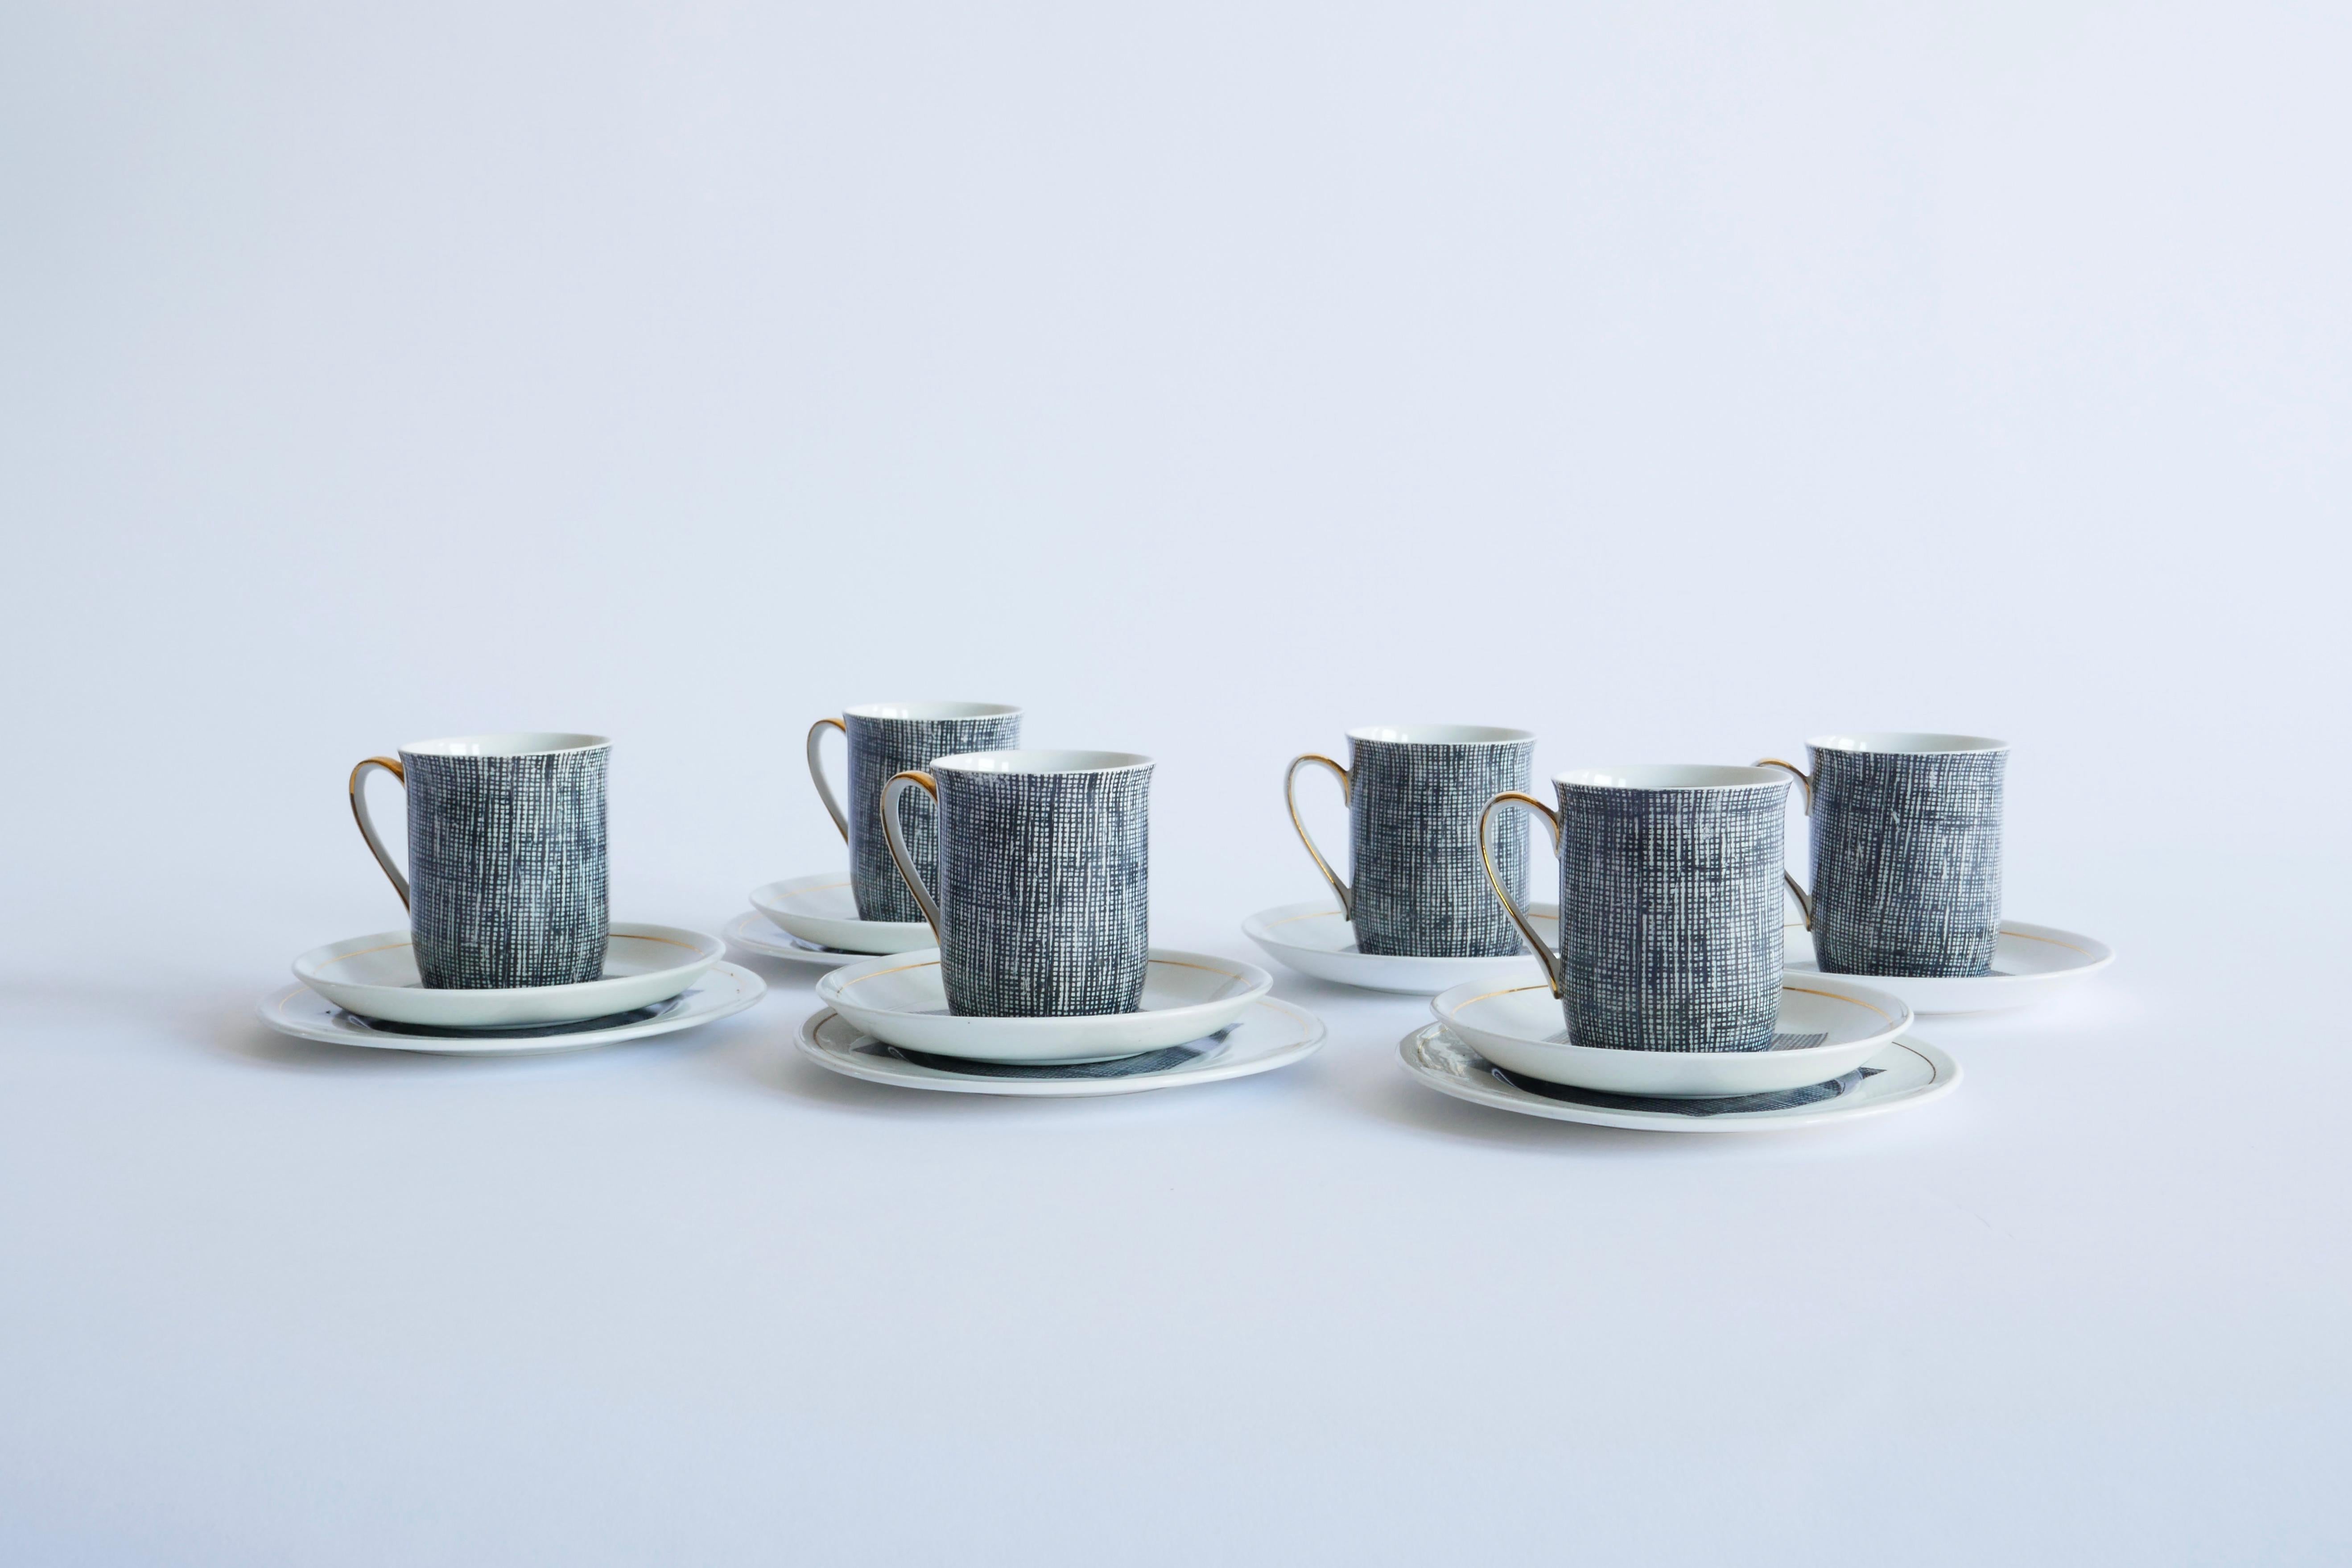 Windsor bone China set of 6 coffee cups with saucers and matching dessert plates

Gold details on the handles and rims, cross hatching black and white pattern with gold trim on a bone china base makes this set beautifully contemporary. 

Made in